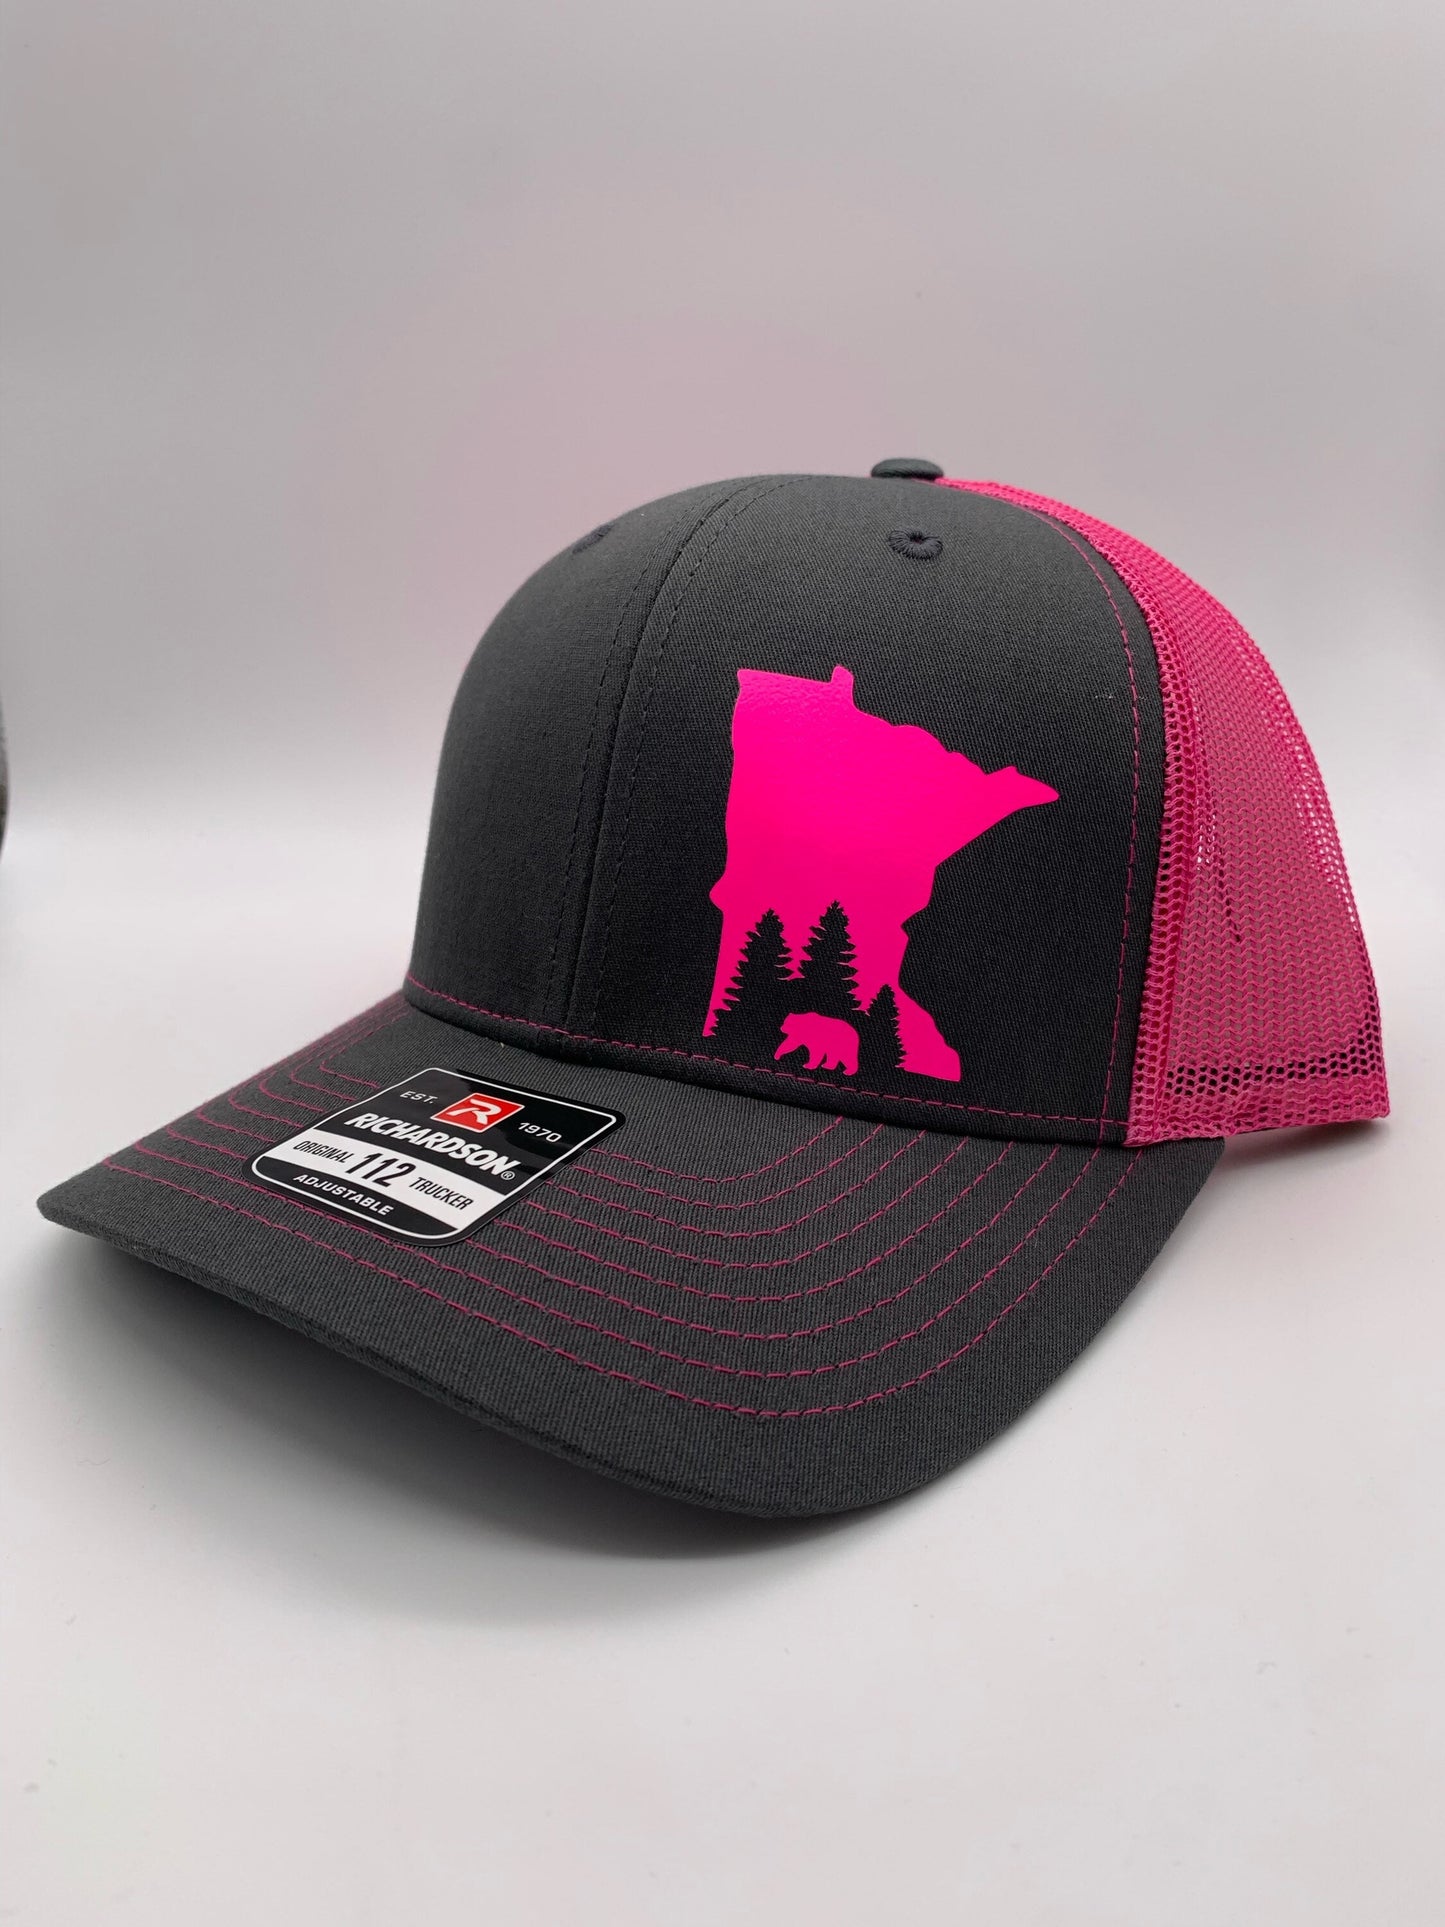 ANY STATE Bear Hunting Without Hounds SnapBack Adjustable Hat